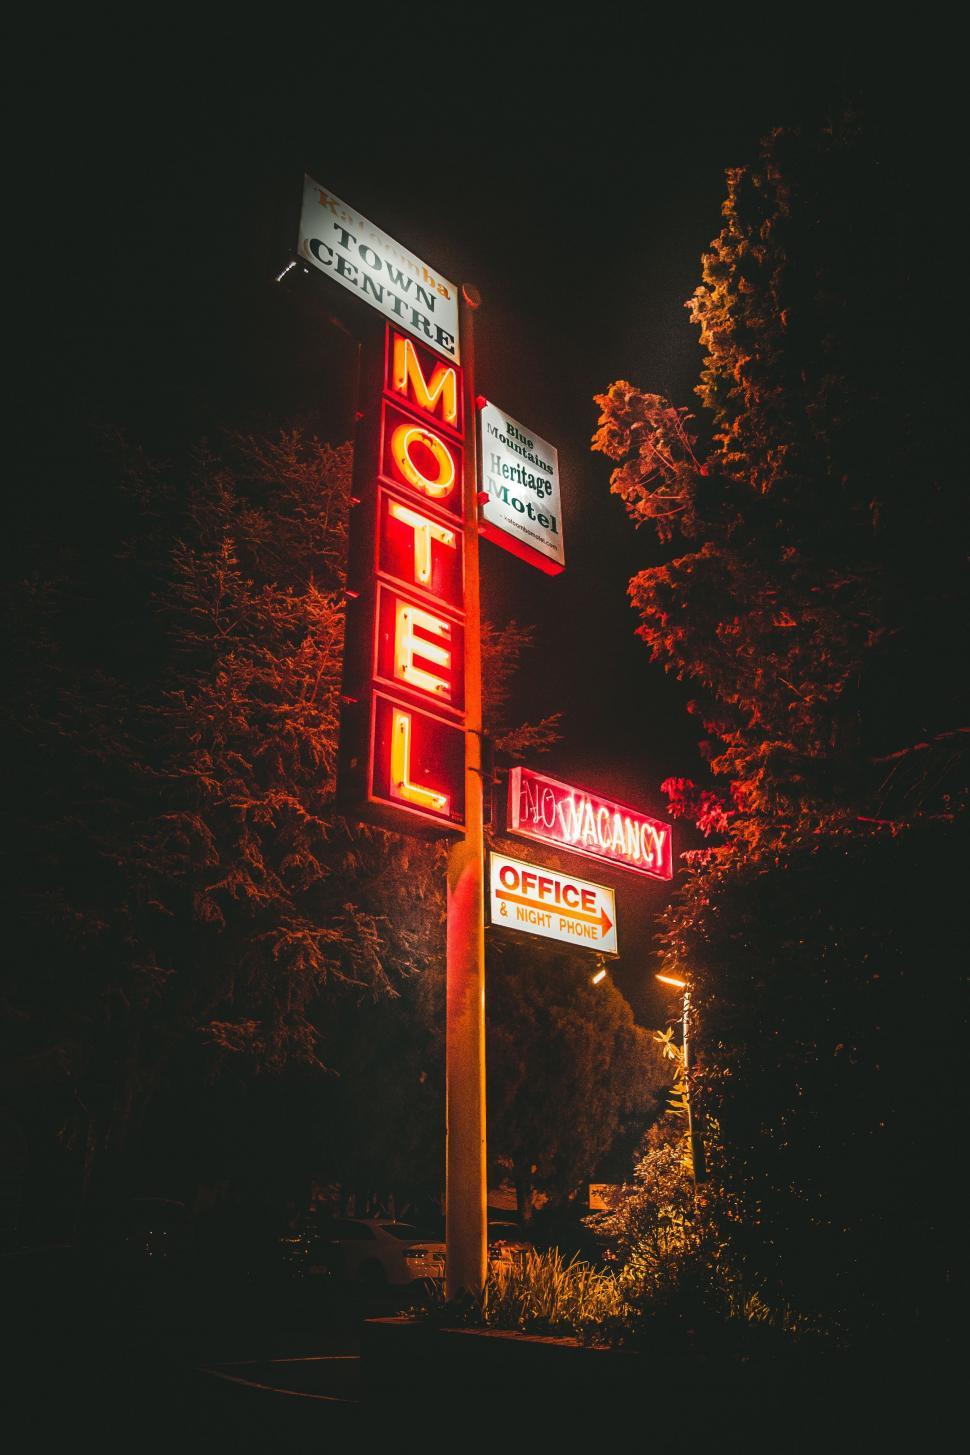 Free Image of Motel Sign Illuminated at Night With Trees in Background 